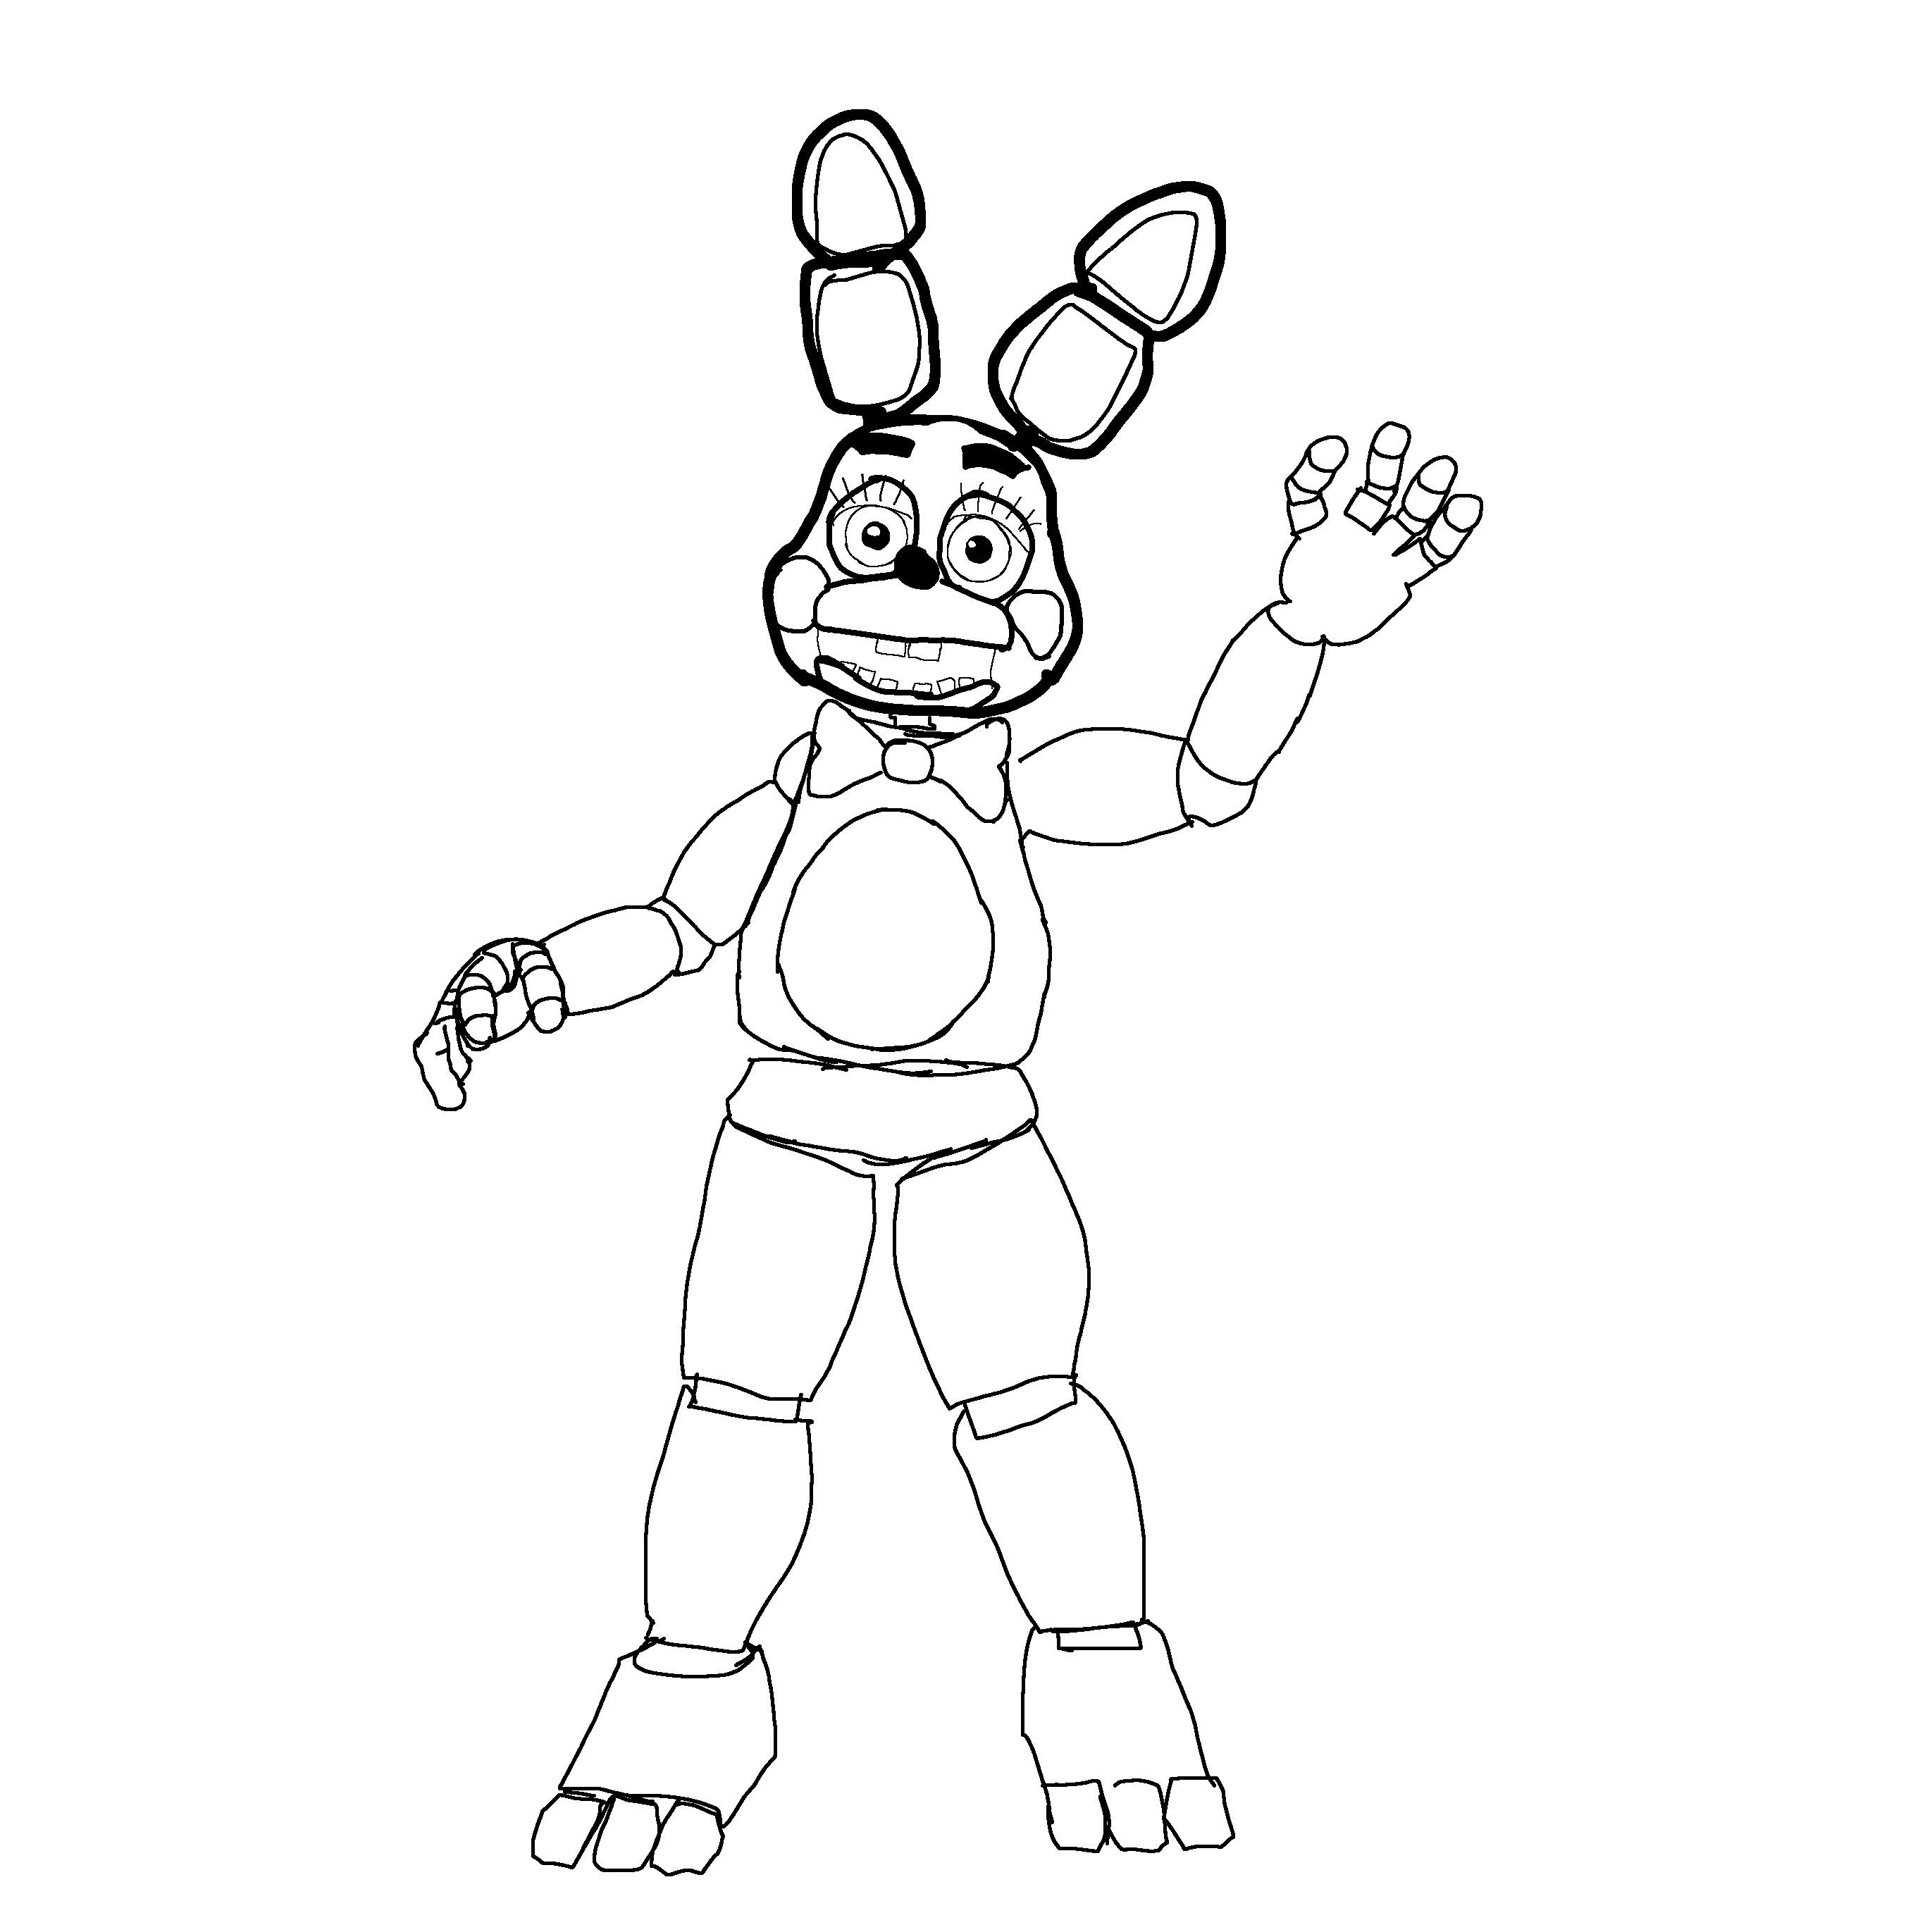 After outlining a toy Bonnie image, I found out how hard it is to draw  animatronics.. mostly at the fingers lol. I also learned many different  things about drawing Bonnie. I wanna